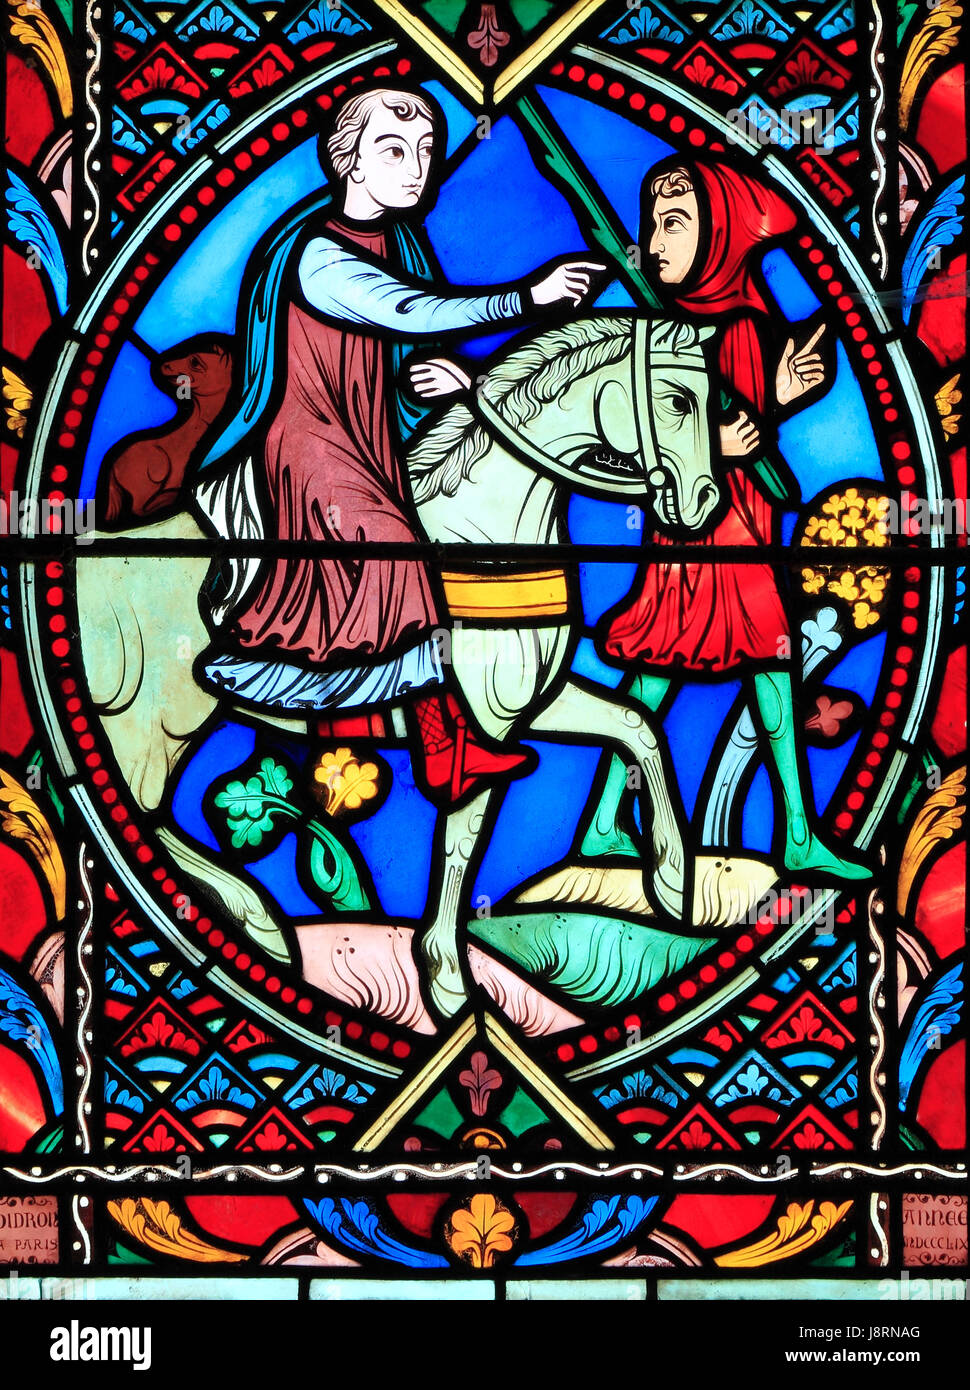 Parable of The Prodigal Son, by Didron of Paris, 1859.  Stained glass window, Feltwell Church, Norfolk, Prodigal Son rides to distant land Stock Photo